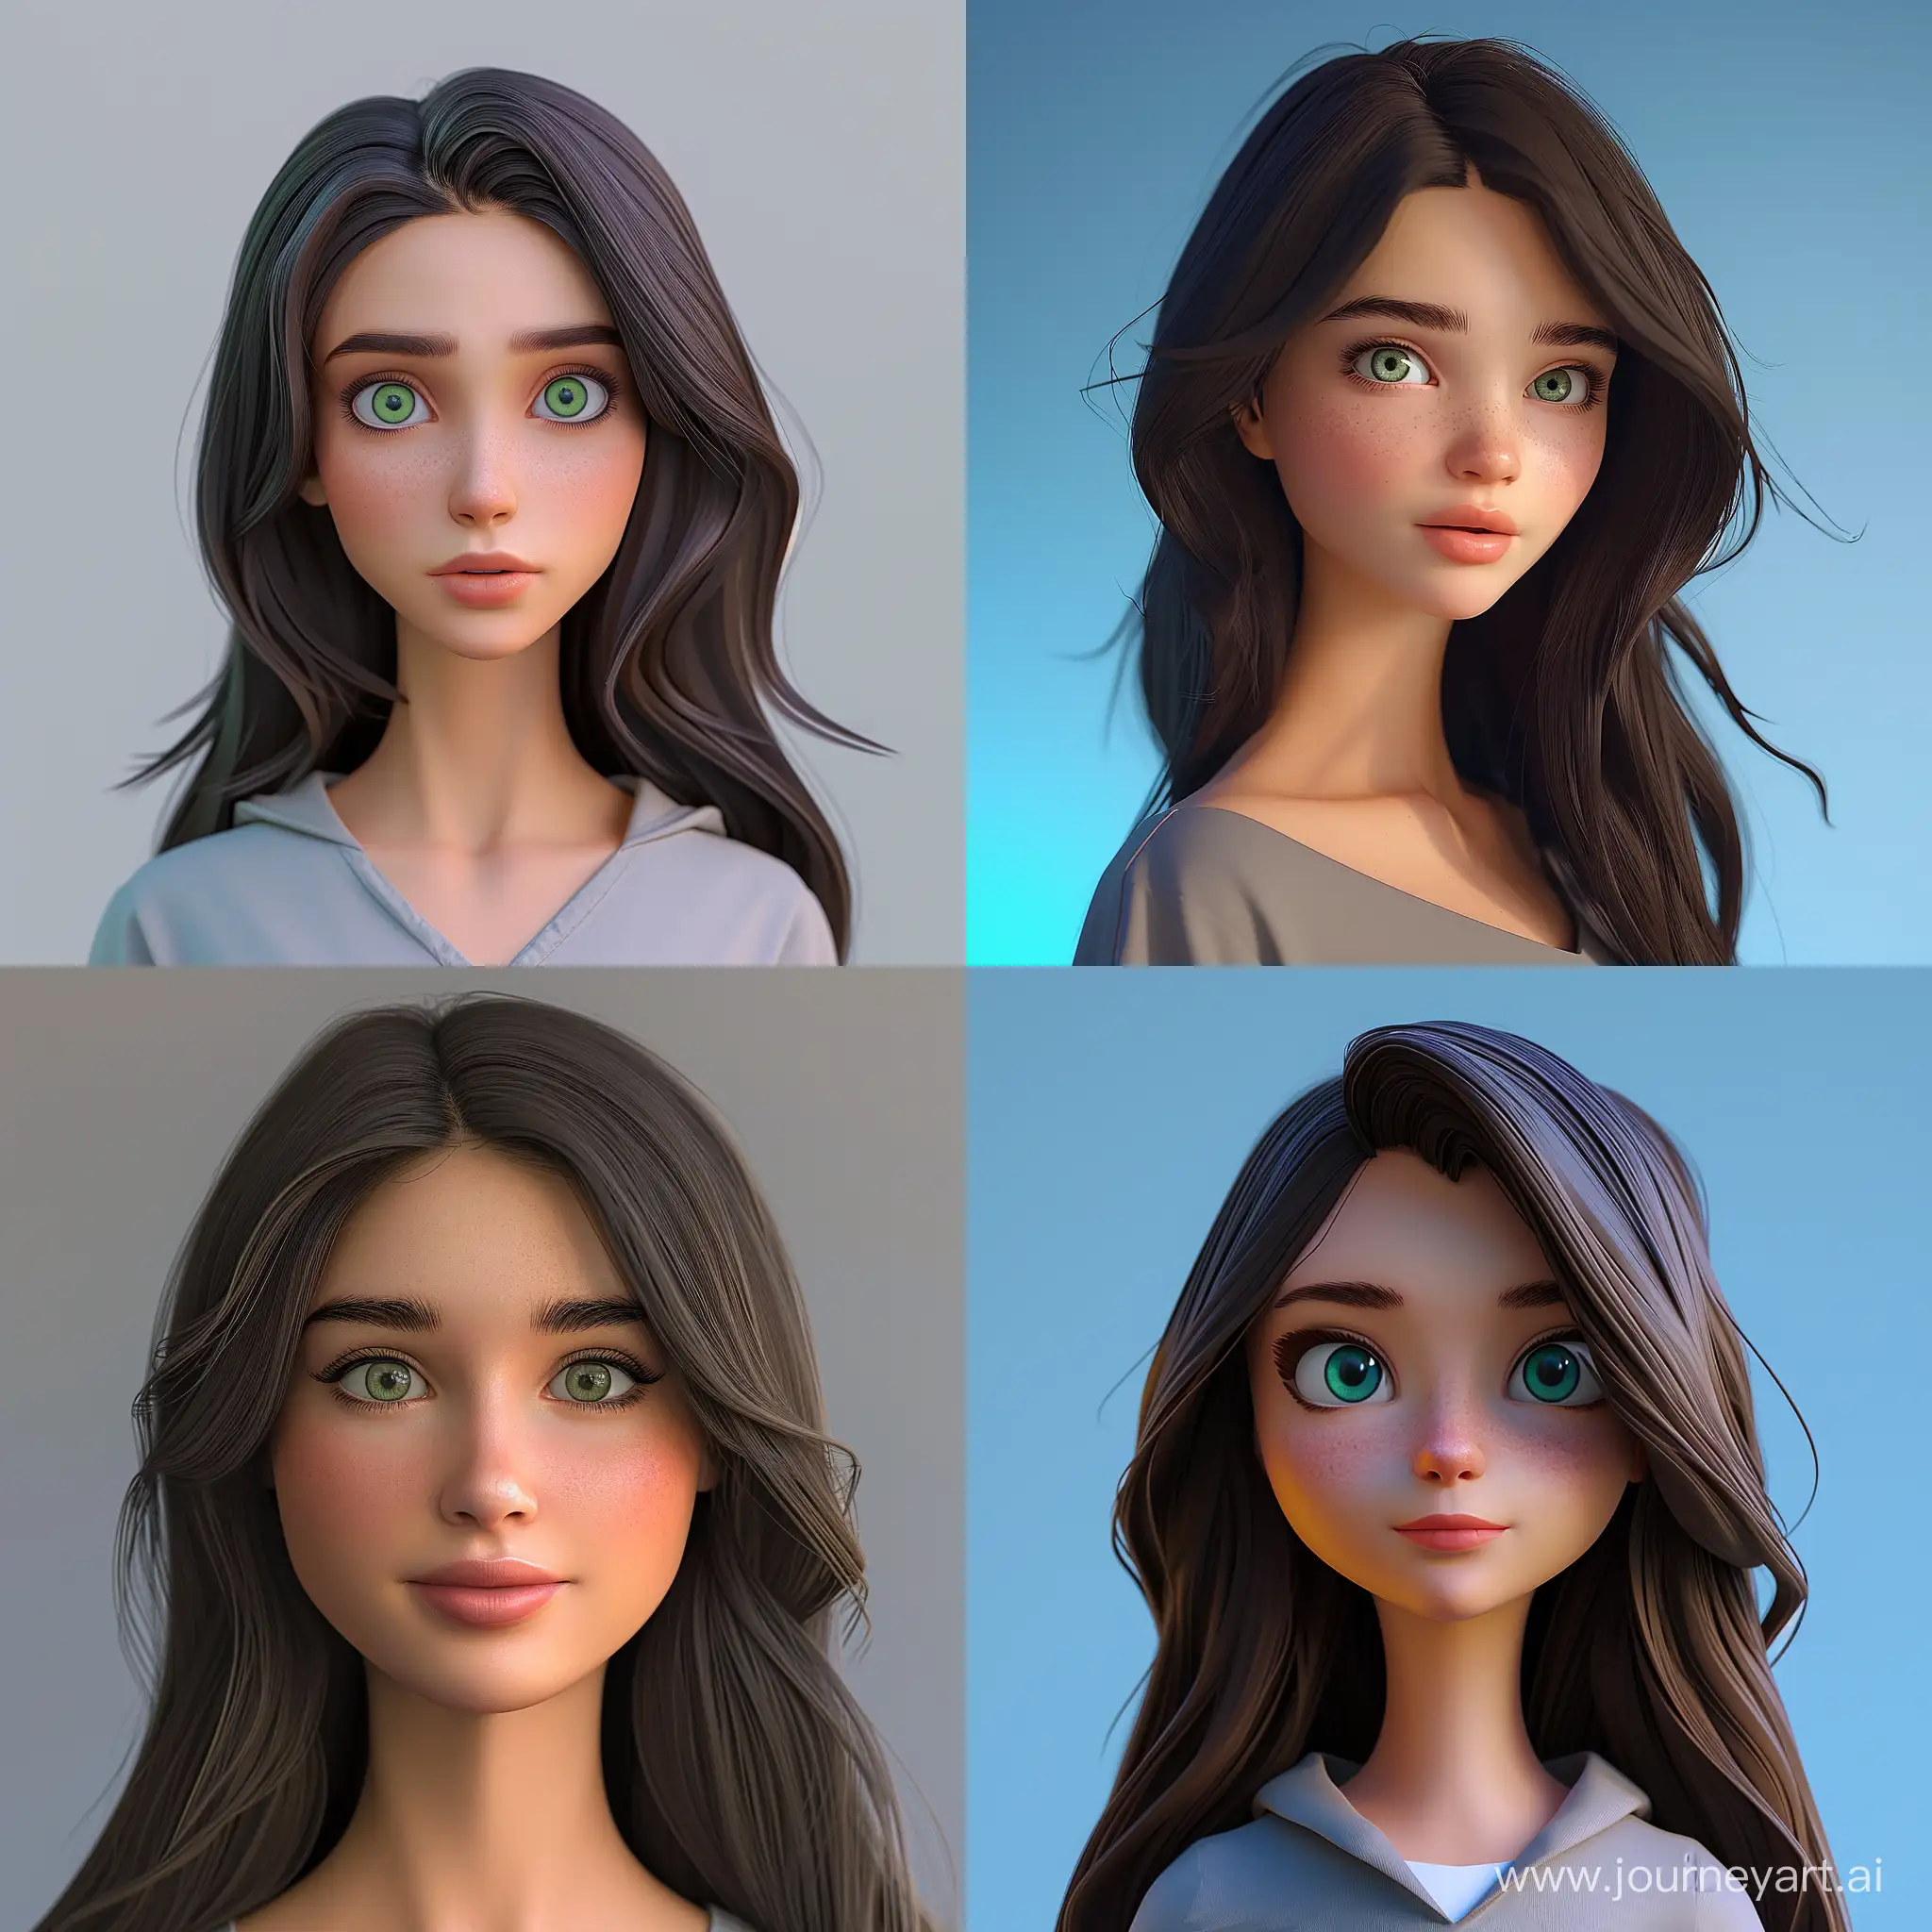 Create a 3D illustration of a female character. age-22 years old, nationality Russian, Slavic type of appearance. The face is oval. The character's hair should be long, dark brown and parted in the middle. The character's eyes should be green, medium, oval, almond-shaped. The character's nose is medium-sized, the shape of the tip of the nose is rounded.  The lips are medium, protruding relative to each other, the contour of the border of the upper lip is sinuous, the shade of the lips is pinkish. The character must be dressed in casual clothes. The Telegram social network is the background for a 3D illustration.